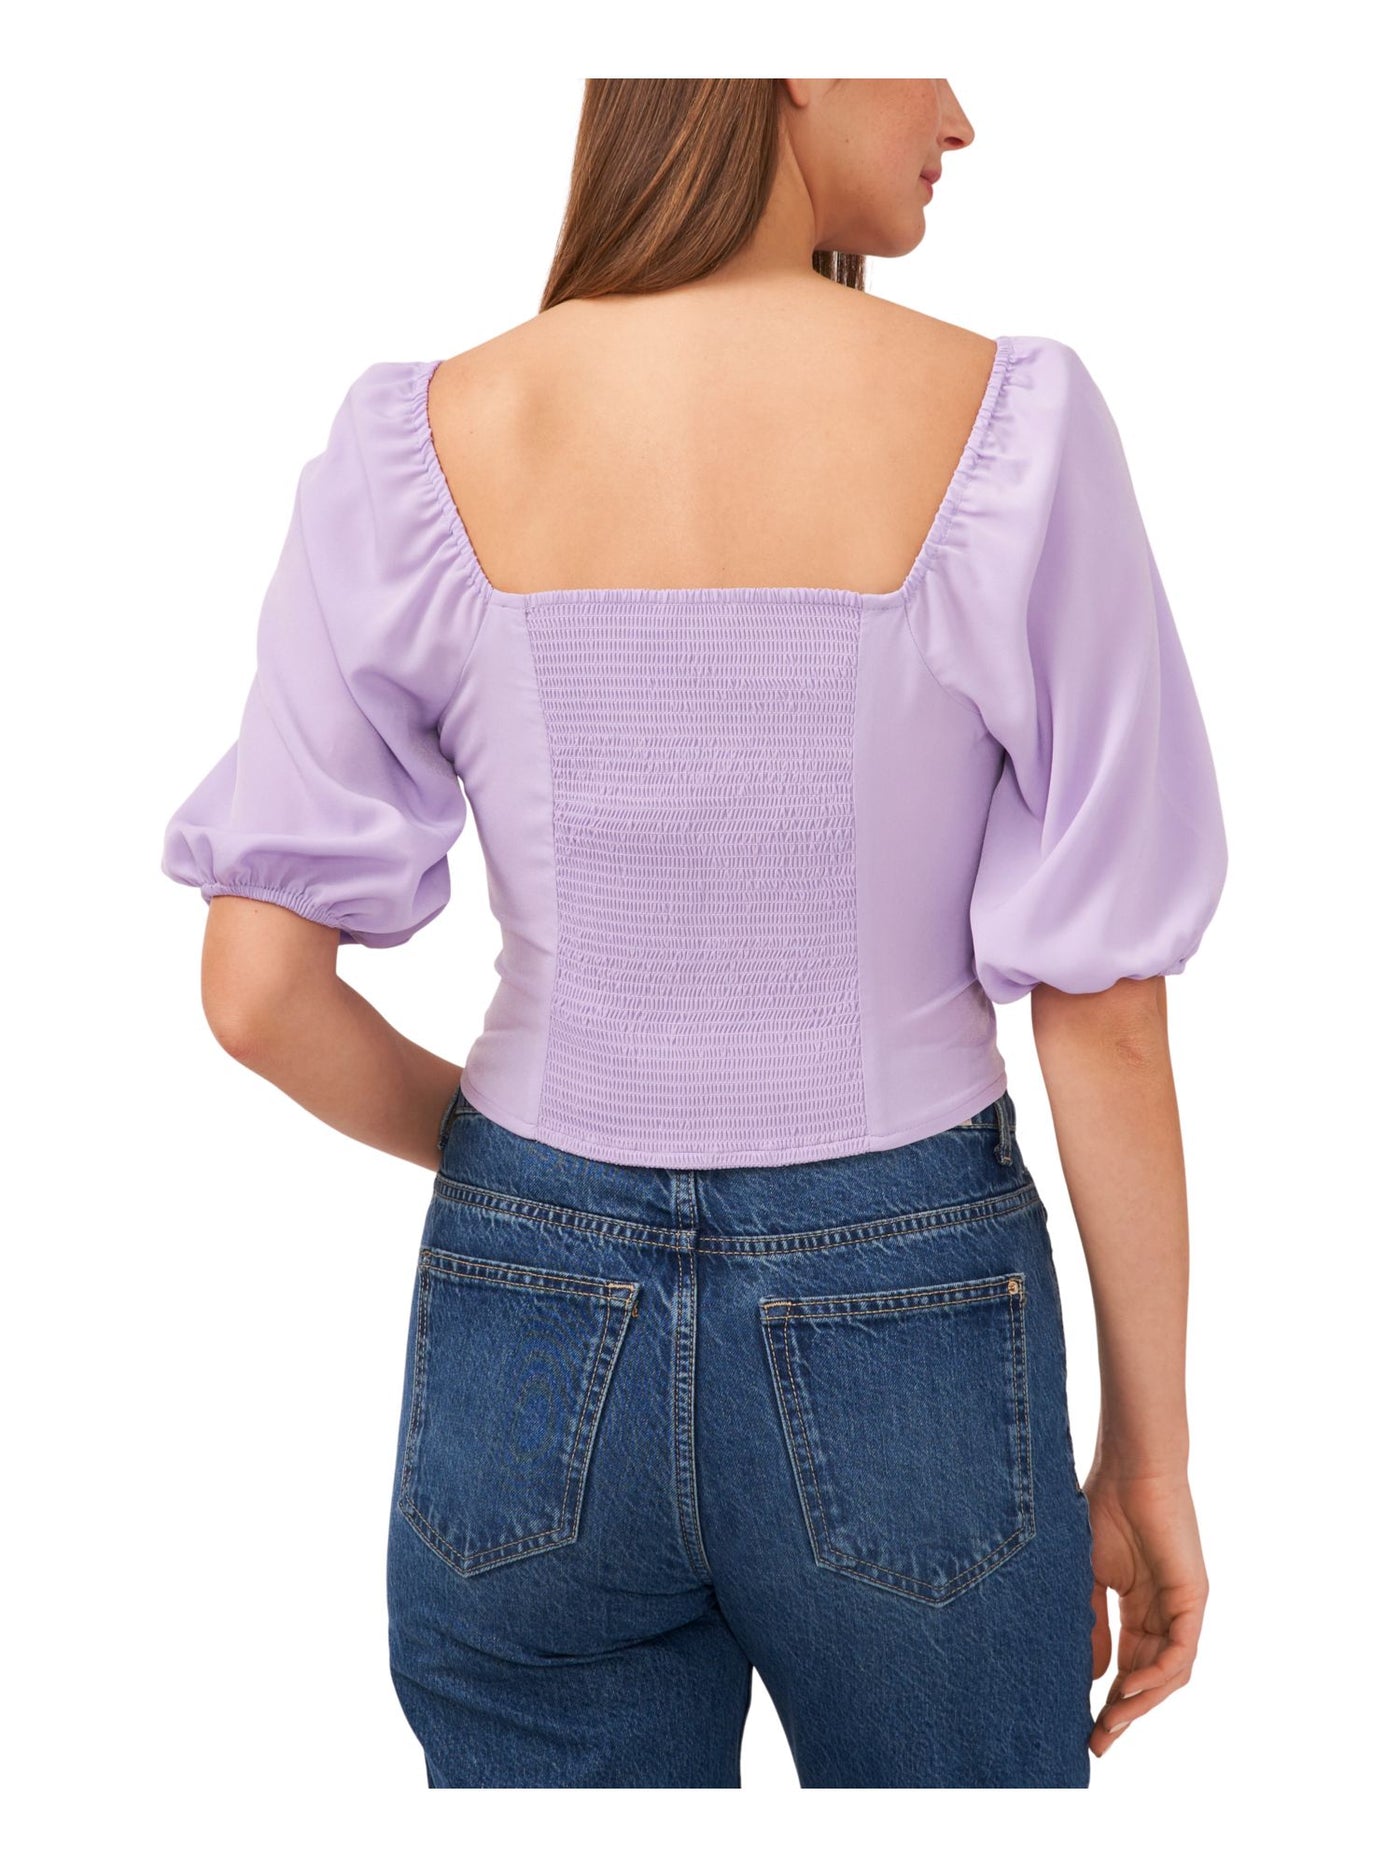 RILEY&RAE Womens Purple Smocked Pullover Unlined Square Back Pouf Sleeve Sweetheart Neckline Top XS